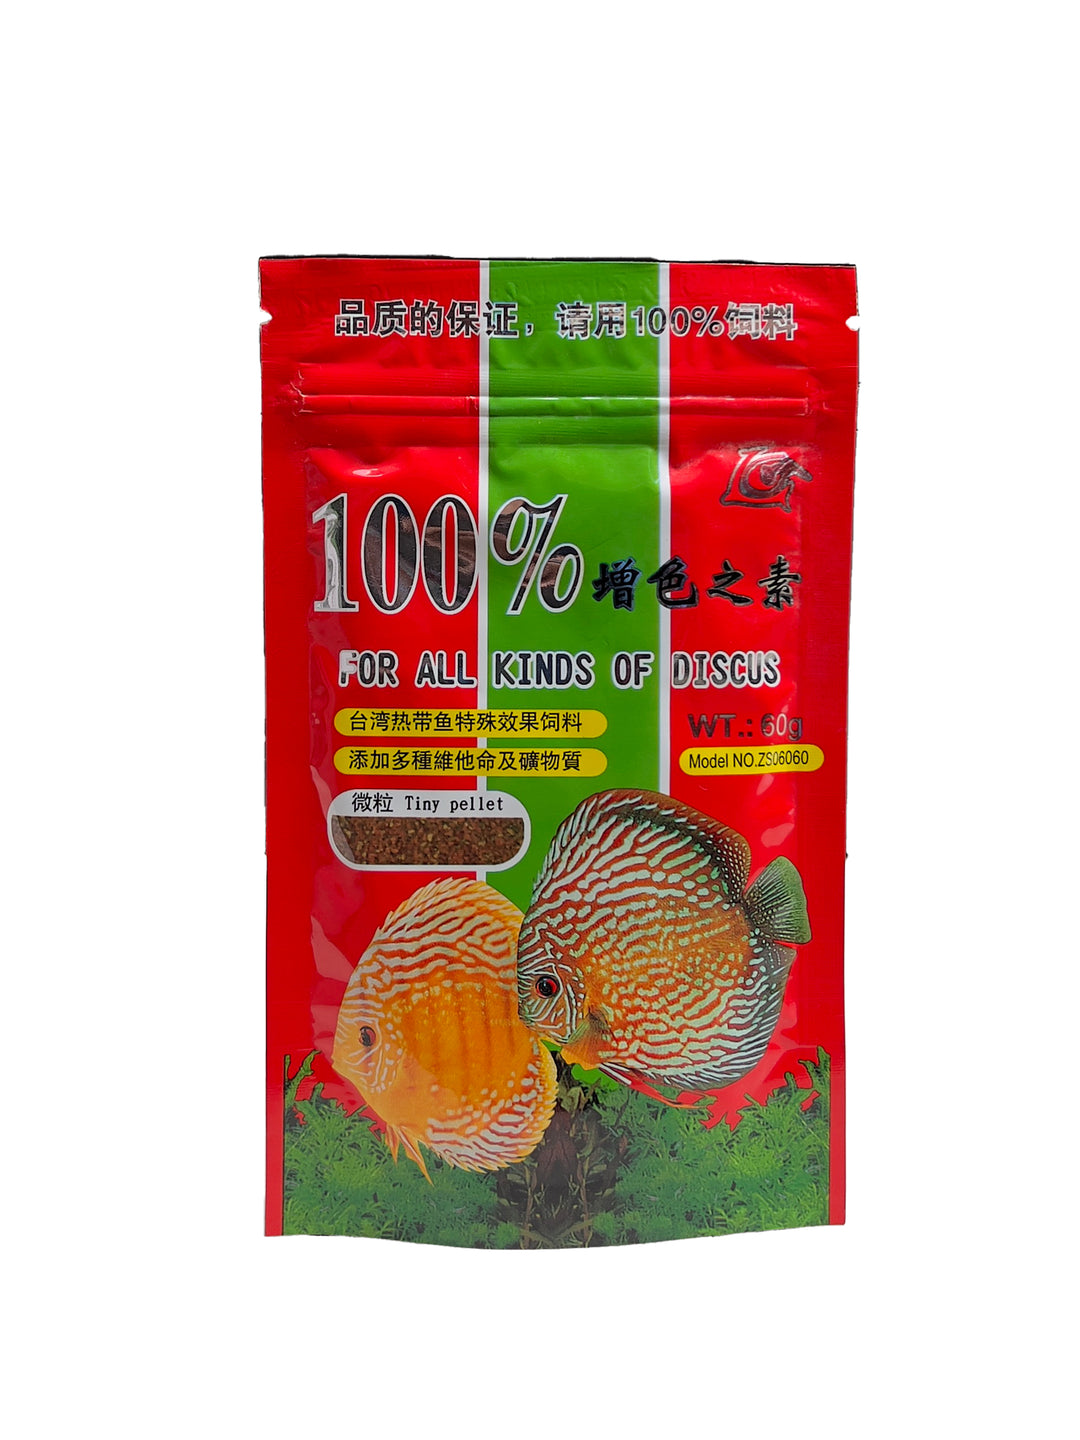 2-Pk) TetraMin TROPICAL FLAKES Fish Food COMPLETE DIET 62g CLEANER